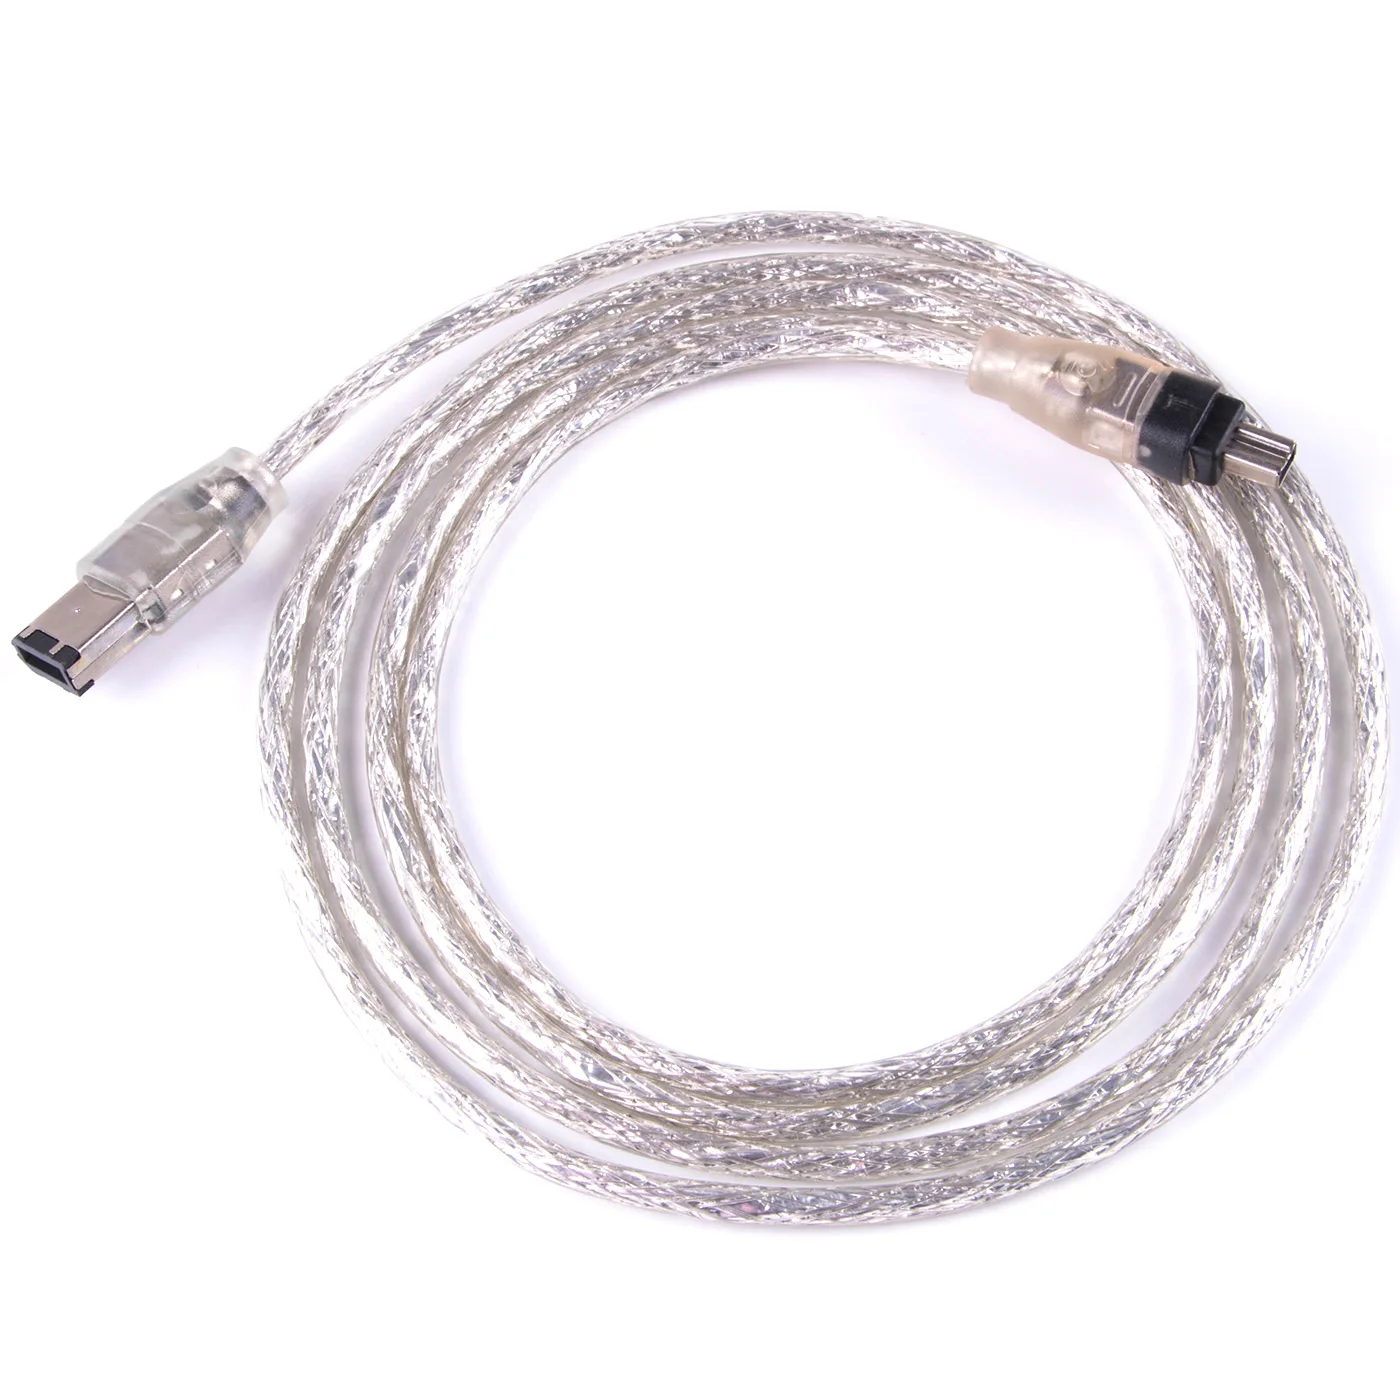 

Camera DV/DCR Defination Cord Cable IEEE 1394 Ports for iLink Adapter Cable 4 Pin 4P To Firewire Cable 5ft